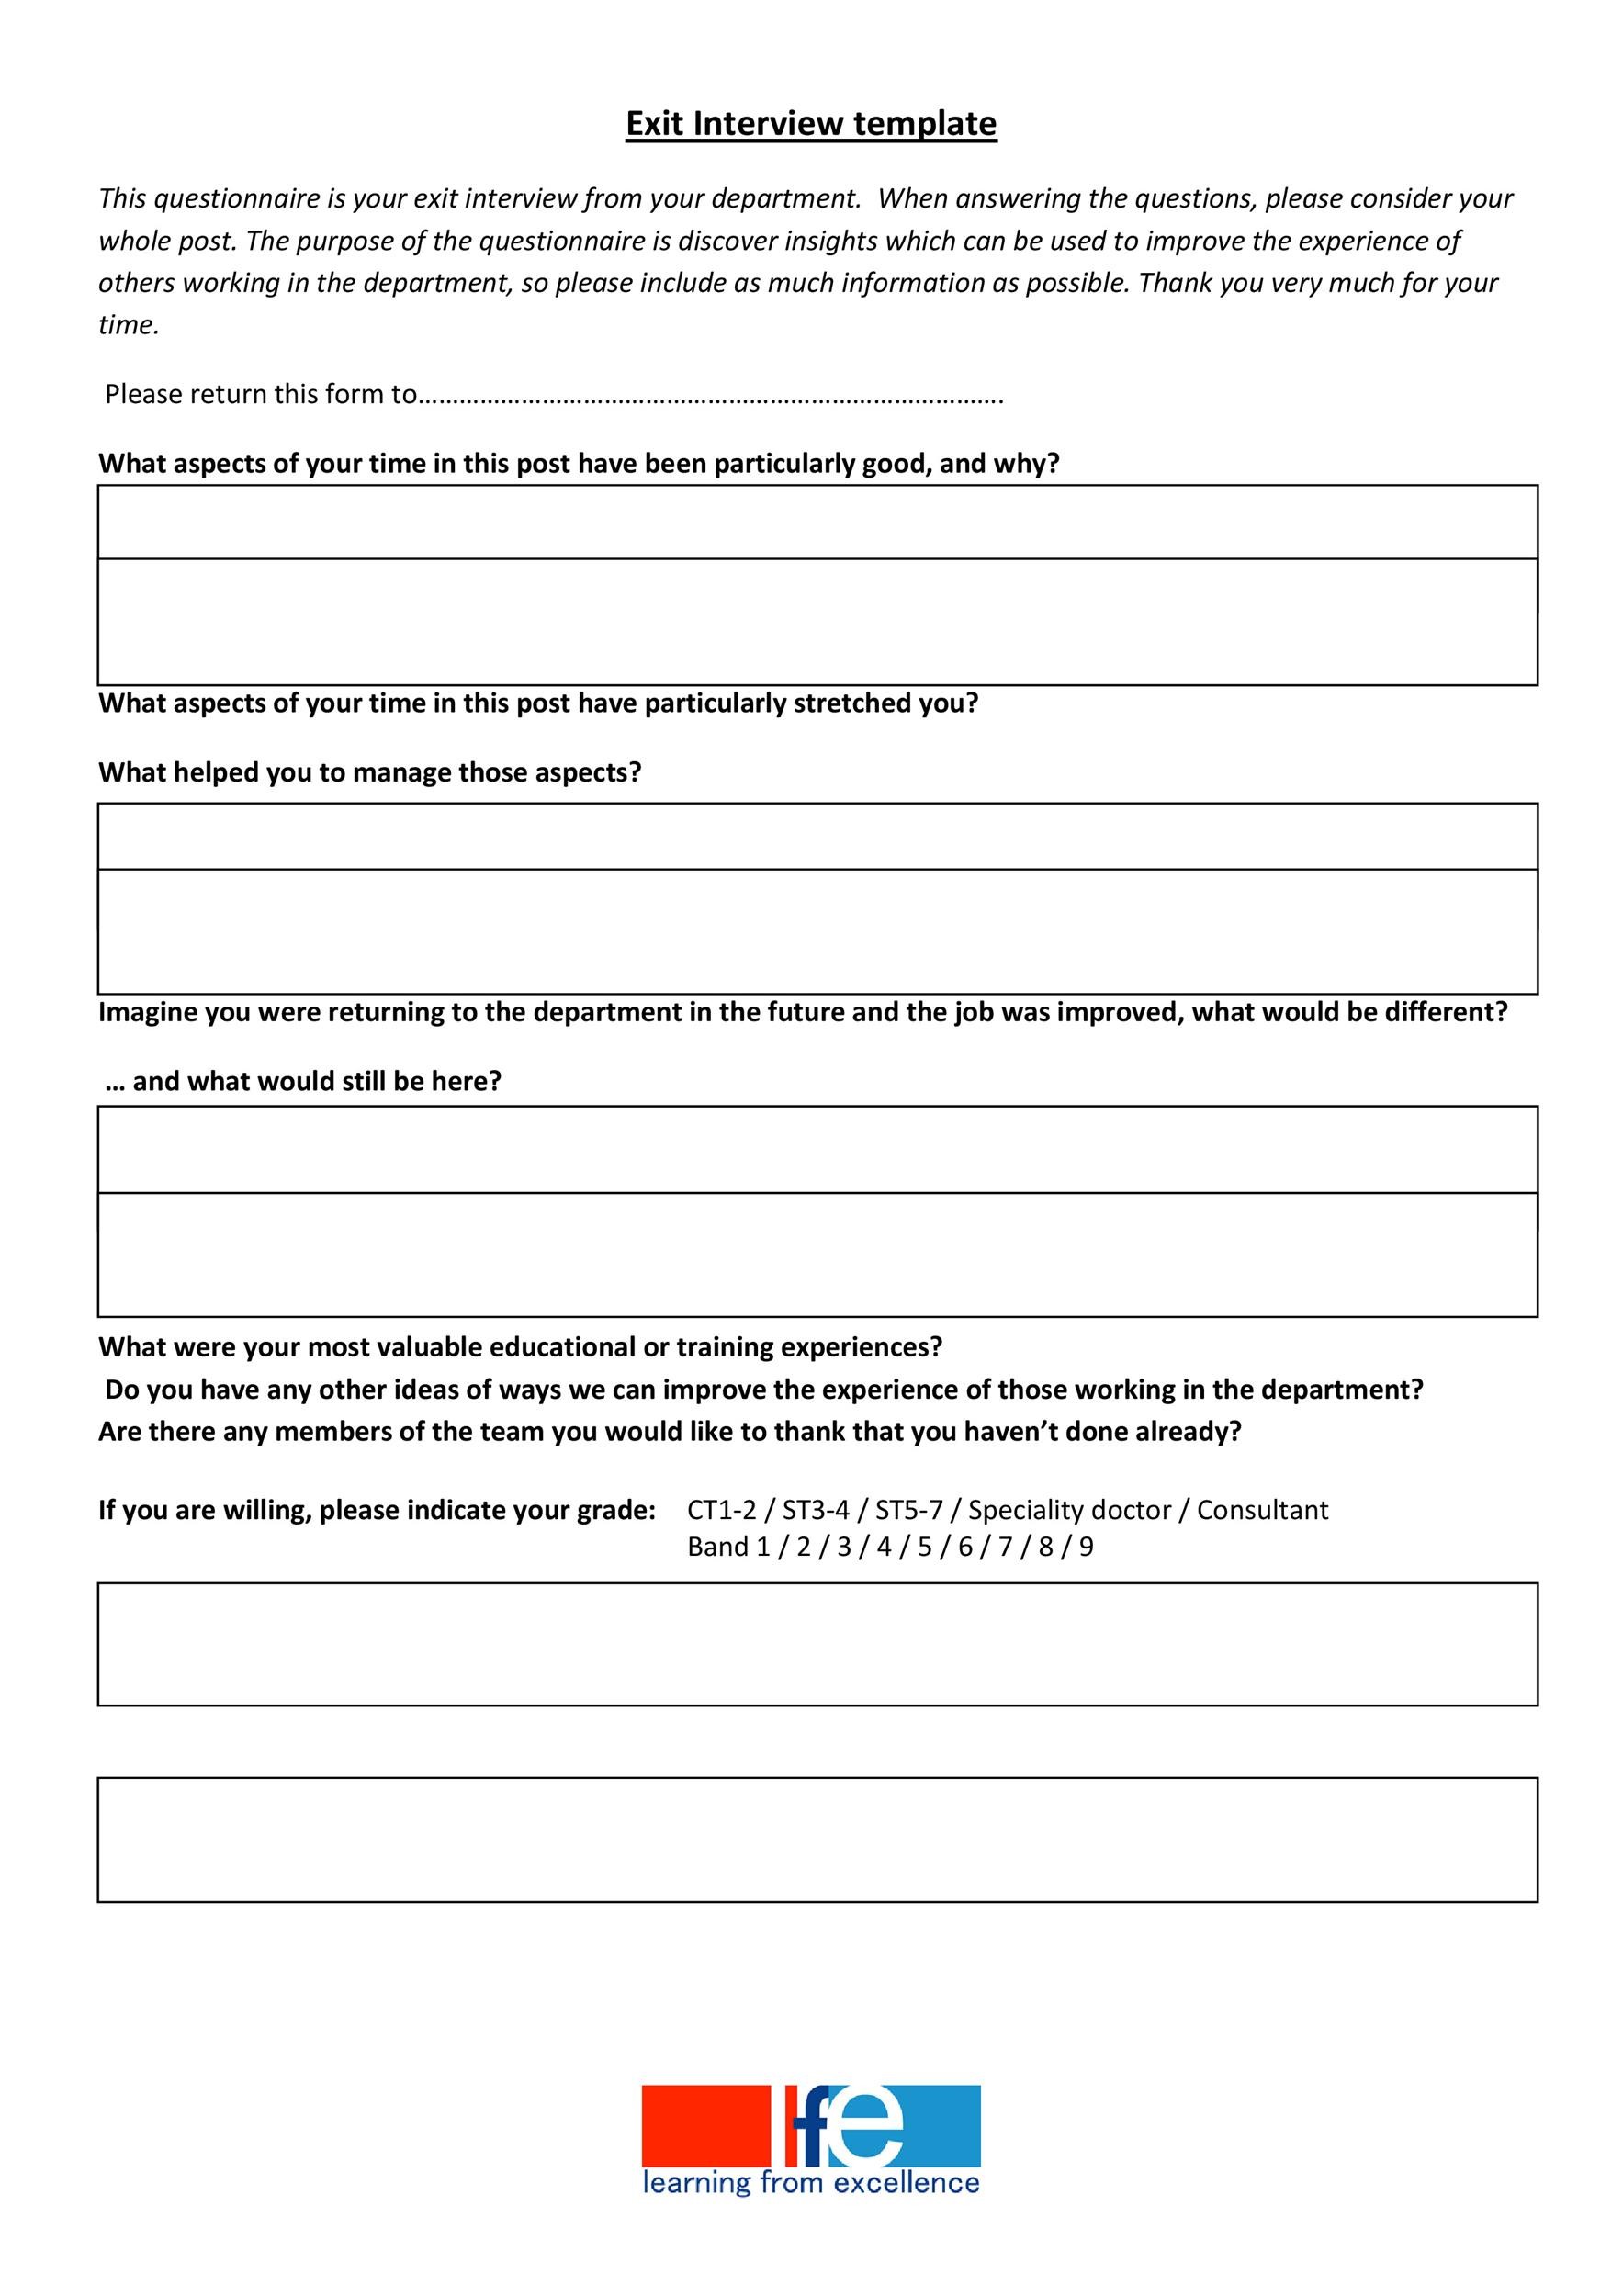 printable-interview-questions-template